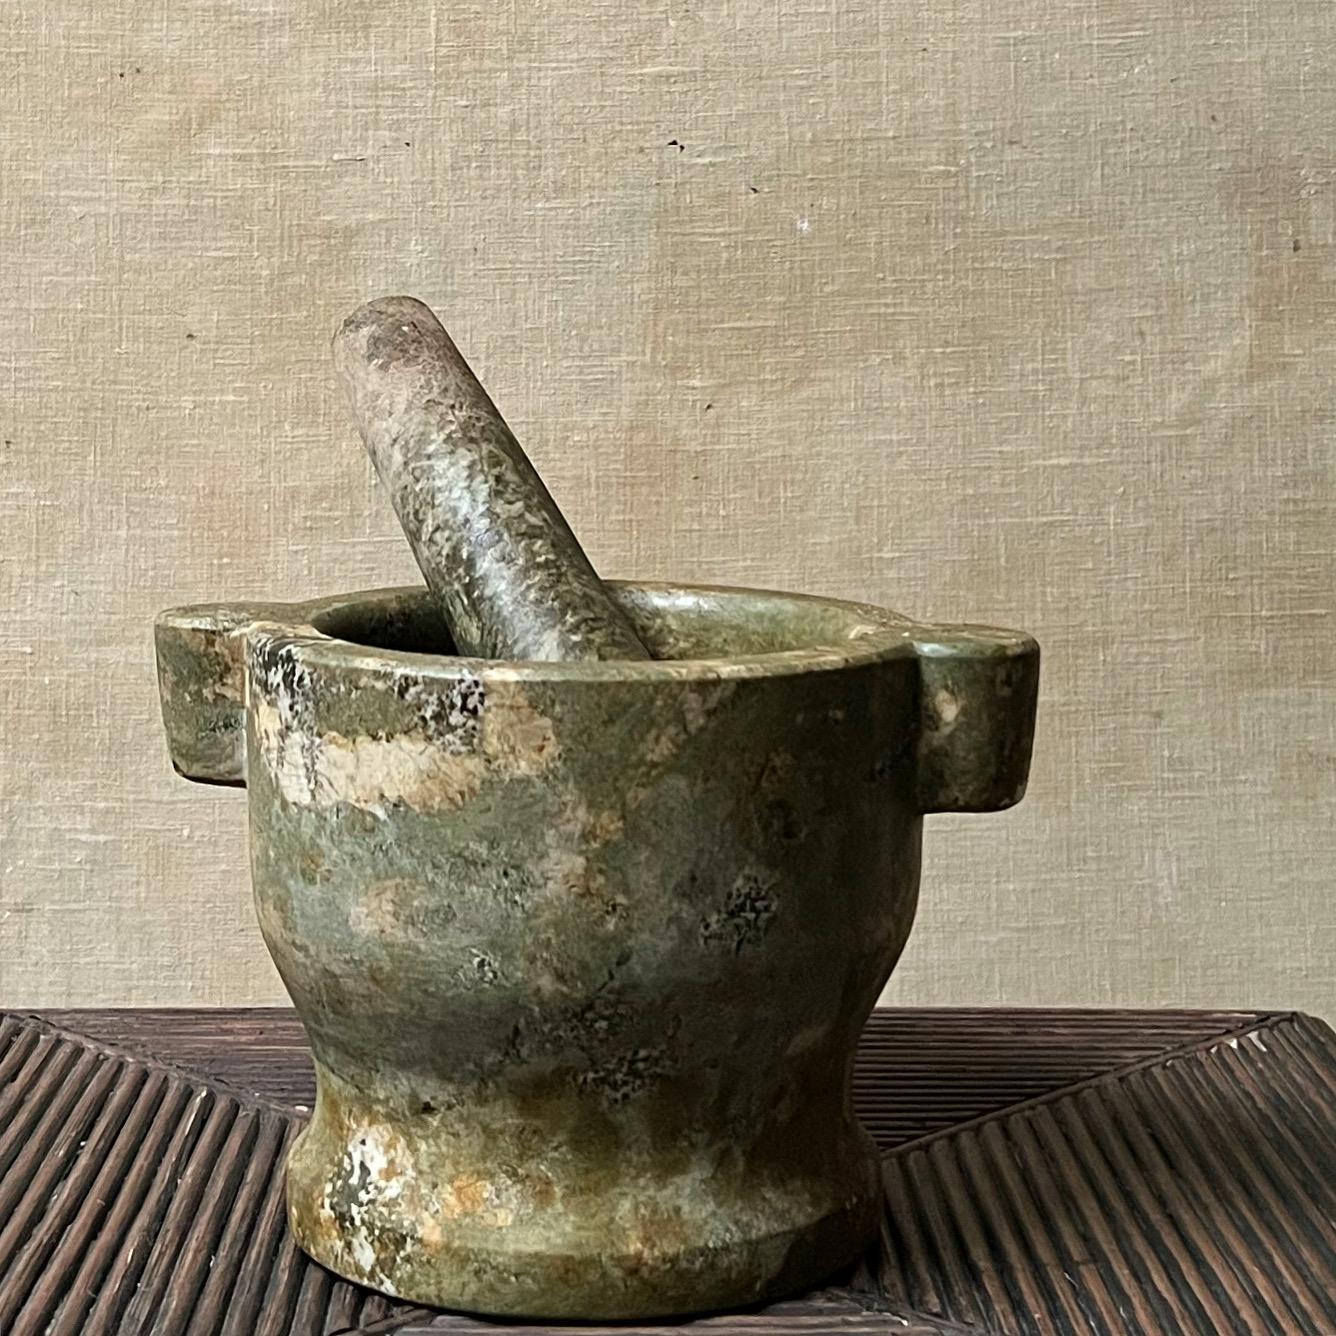 This mortar was found in sweden. It was handcrafted around 1900. It was definitely used as you can see some traces. Made of green marble. Perfect as mortar, planter or decorative object. Different shades of green and grey with a fantastic patina.